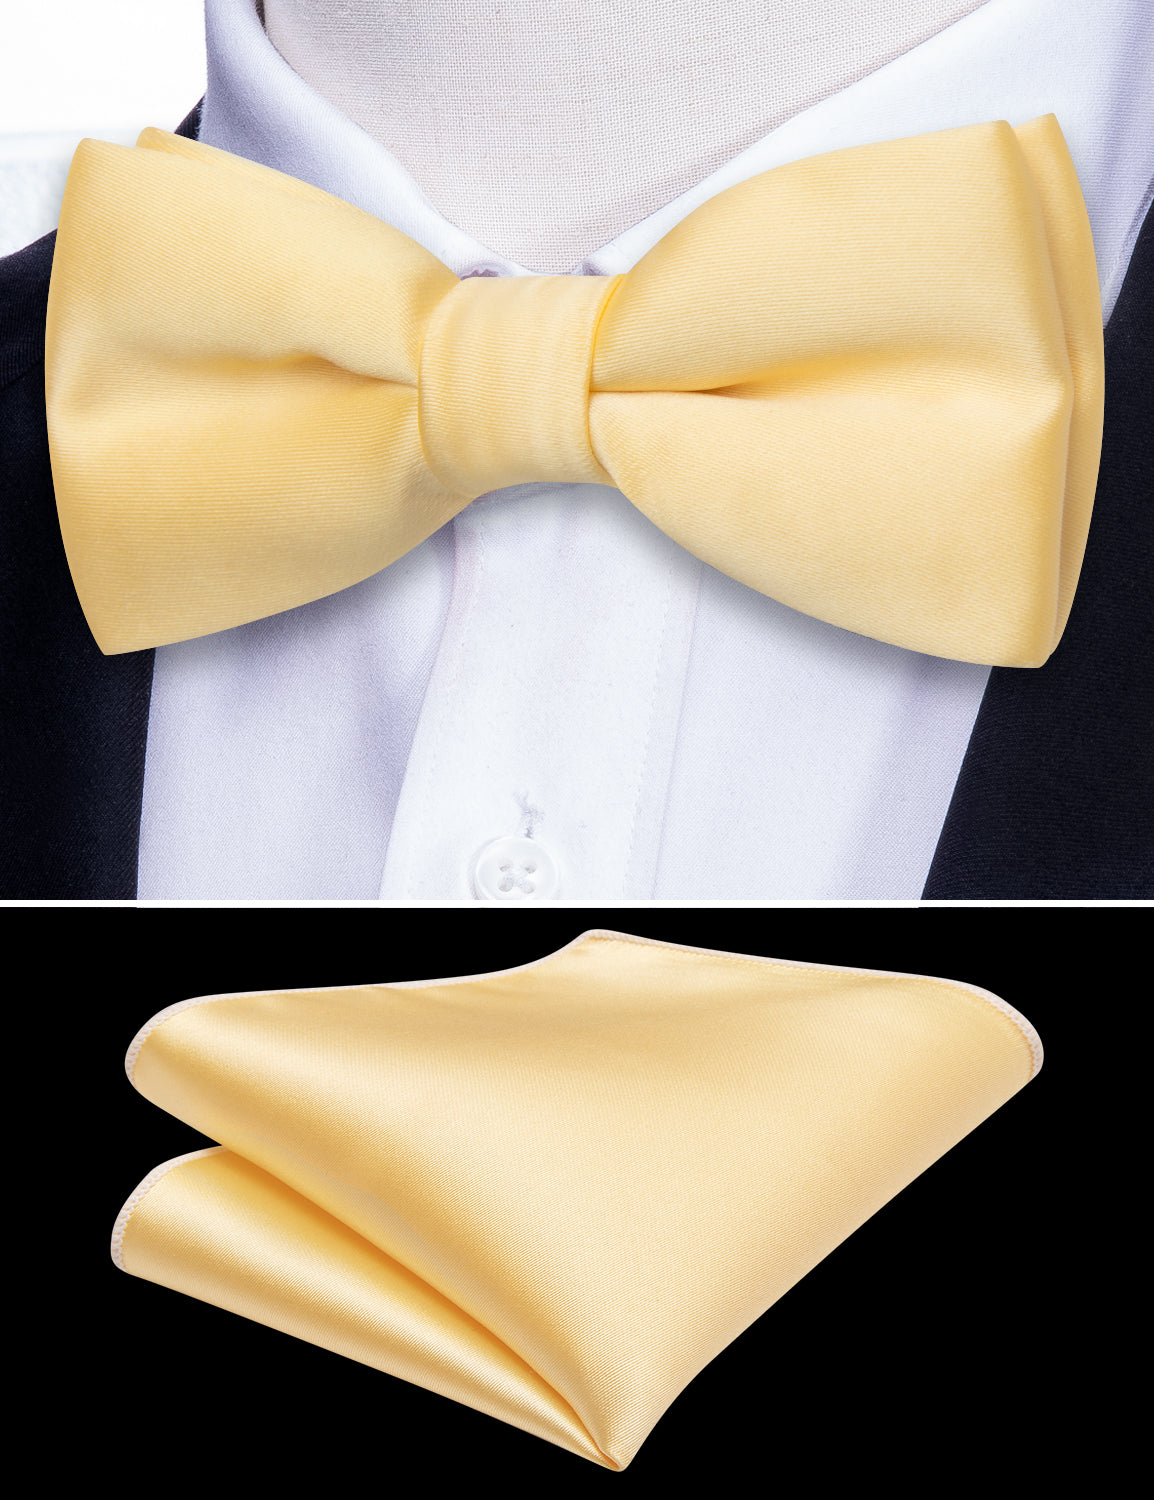 Barry.wang Kids Tie Yellow Gold Solid Bow Tie Pocket Square Set